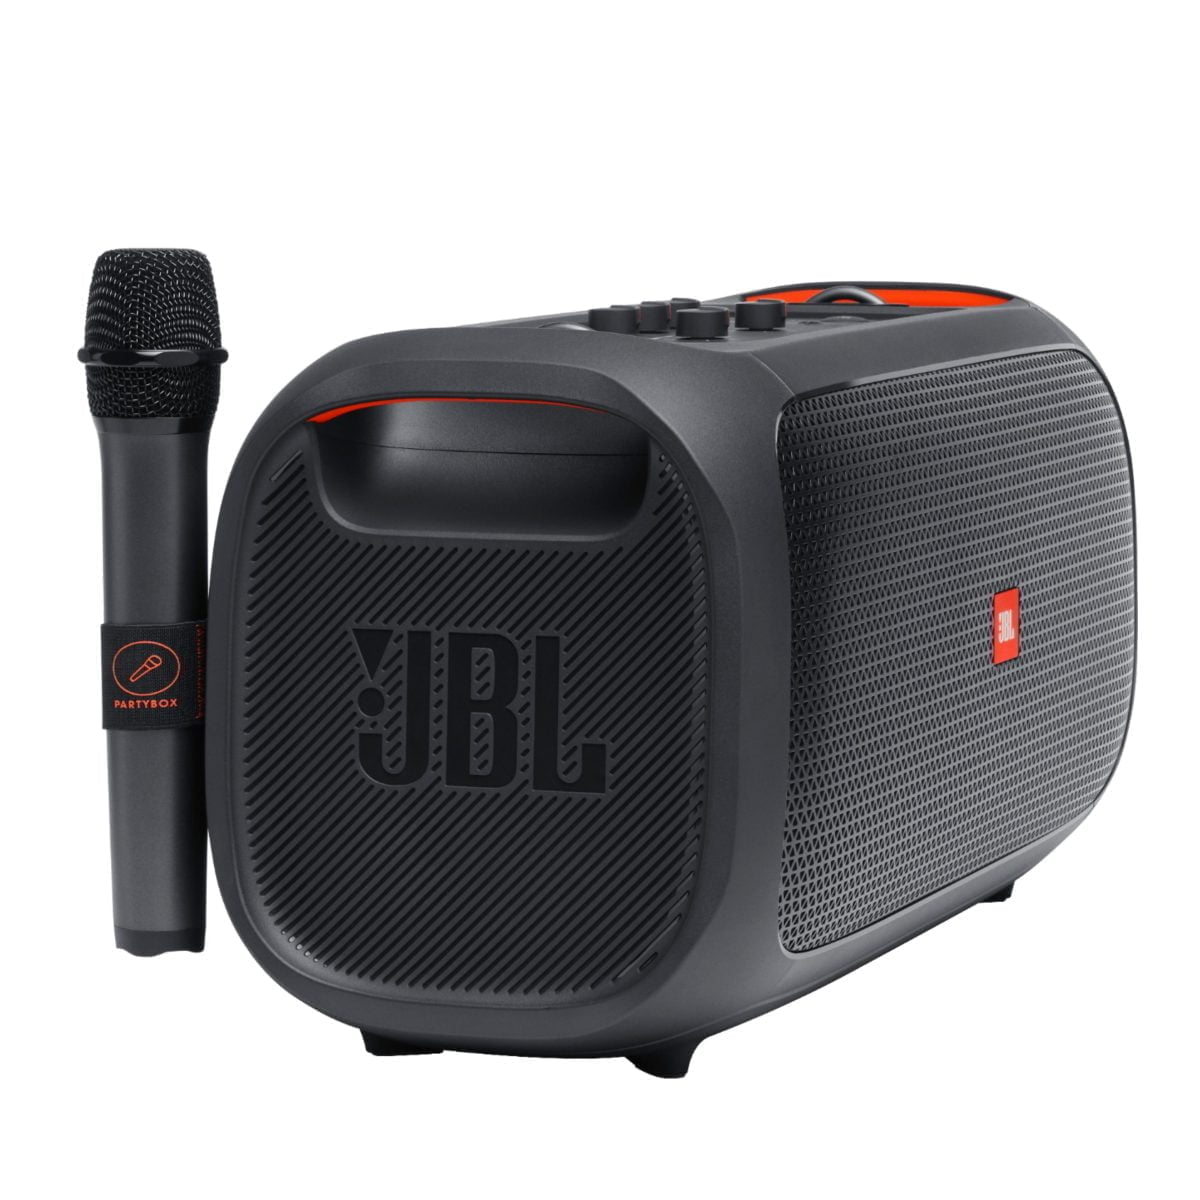 6426699Cv28D Scaled &Lt;H1 Class=&Quot;Heading-5 V-Fw-Regular&Quot;&Gt;Jbl - Partybox On-The-Go Portable Party Speaker - Black&Lt;/H1&Gt; Take Your Party Anywhere And Sing Everywhere. From Beach Parties To Festivals, The Jbl Partybox On-The-Go Lets You See, Hear And Feel The Beat. Turn It Up Loud With 100 Watts Of Powerful Jbl Pro Sound, Synched To A Dazzling Light Show. Access Your Favorite Tunes With Bluetooth, Usb, Aux And Tws (True Wireless Stereo) Connectivity, Grab A Friend And Sing Your Hearts Out With The Jbl Wireless Mics, Or Use The Instrument Input To Play Along. With A Bottle Opener, Padded Shoulder Strap, Rechargeable Battery And Ipx4 Splash-Proof Protection, The Jbl Partybox On-The-Go Has Everything You Need To Get The Party Started—And Take It With You. Jbl Partybox Jbl Partybox On-The-Go Portable Party Speaker - Black